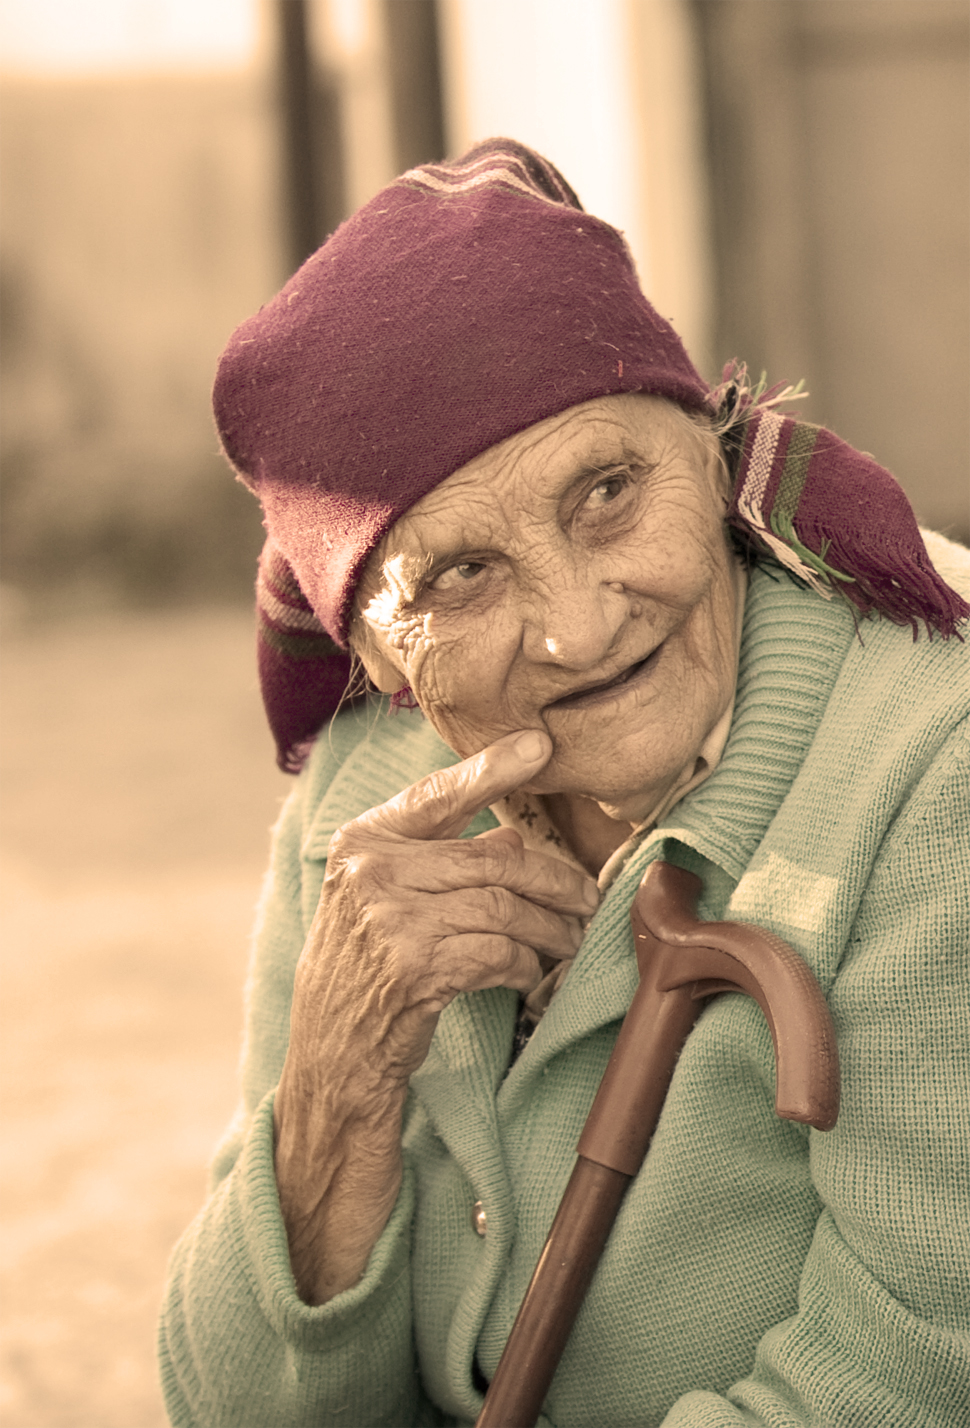 http://upload.wikimedia.org/wikipedia/commons/4/40/Old_woman_in_Kyrgyzstan,_2010.jpg